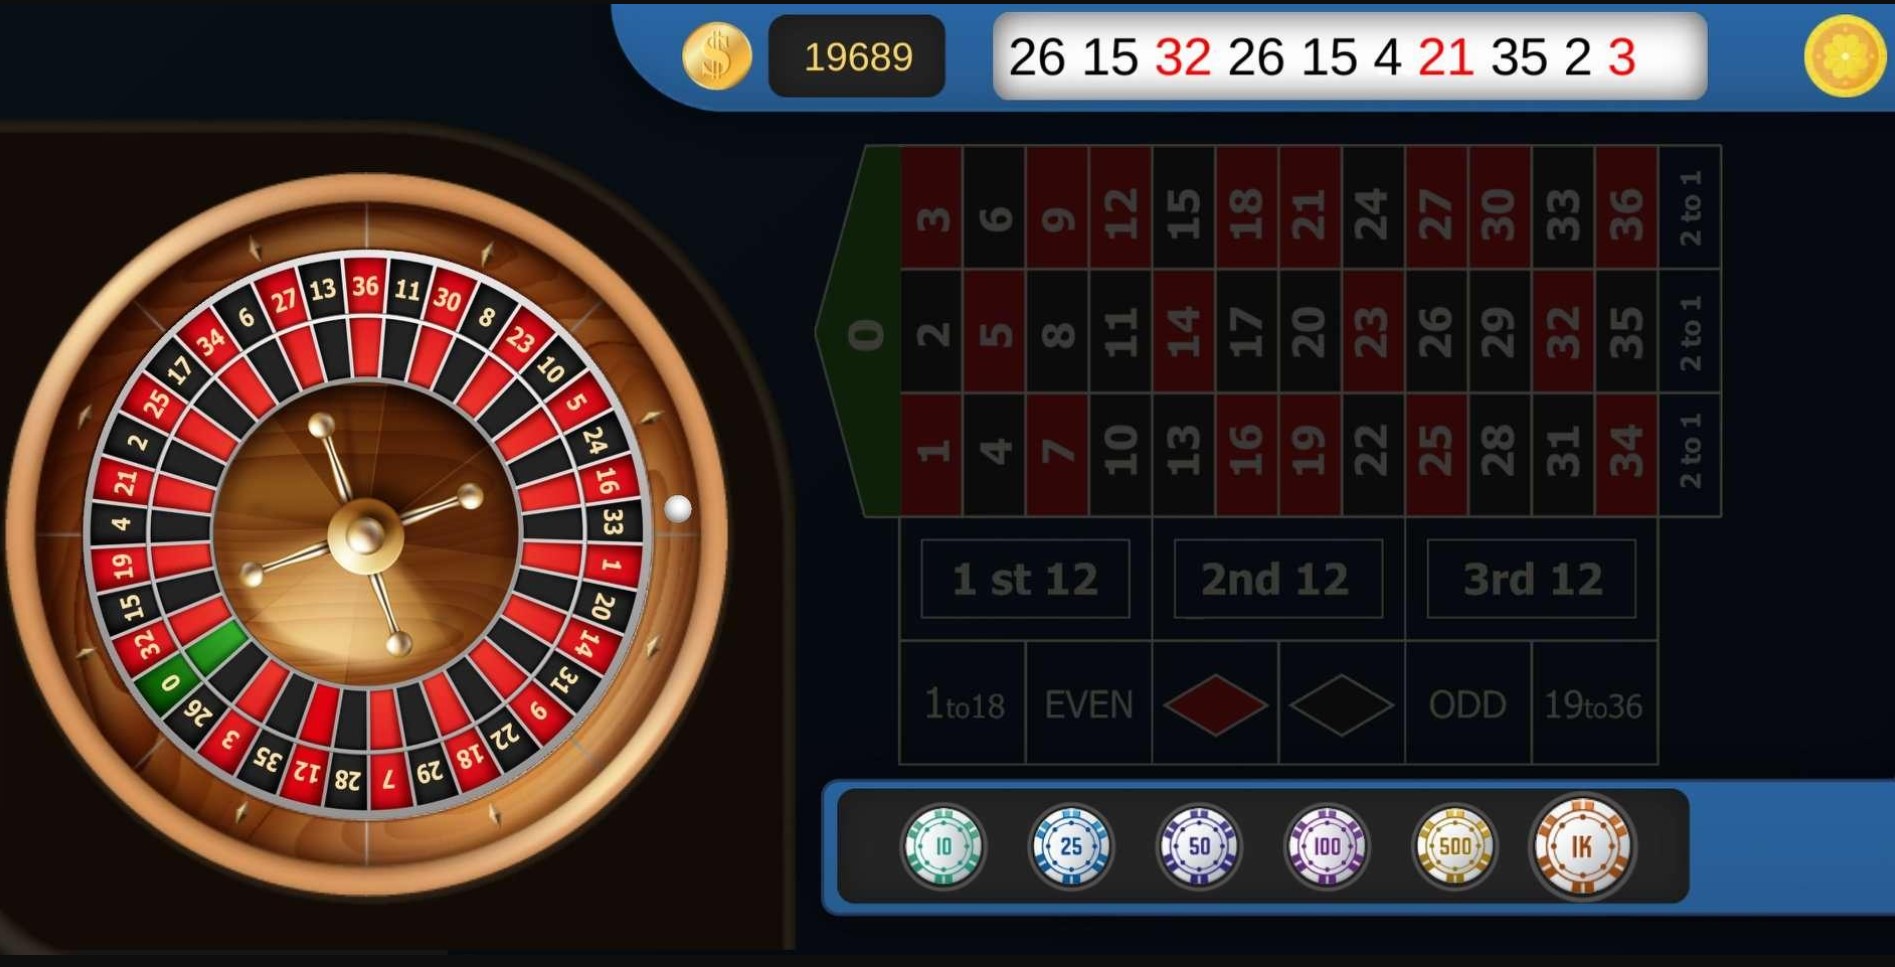 What are the odds of winning at roulette and how are they calculated